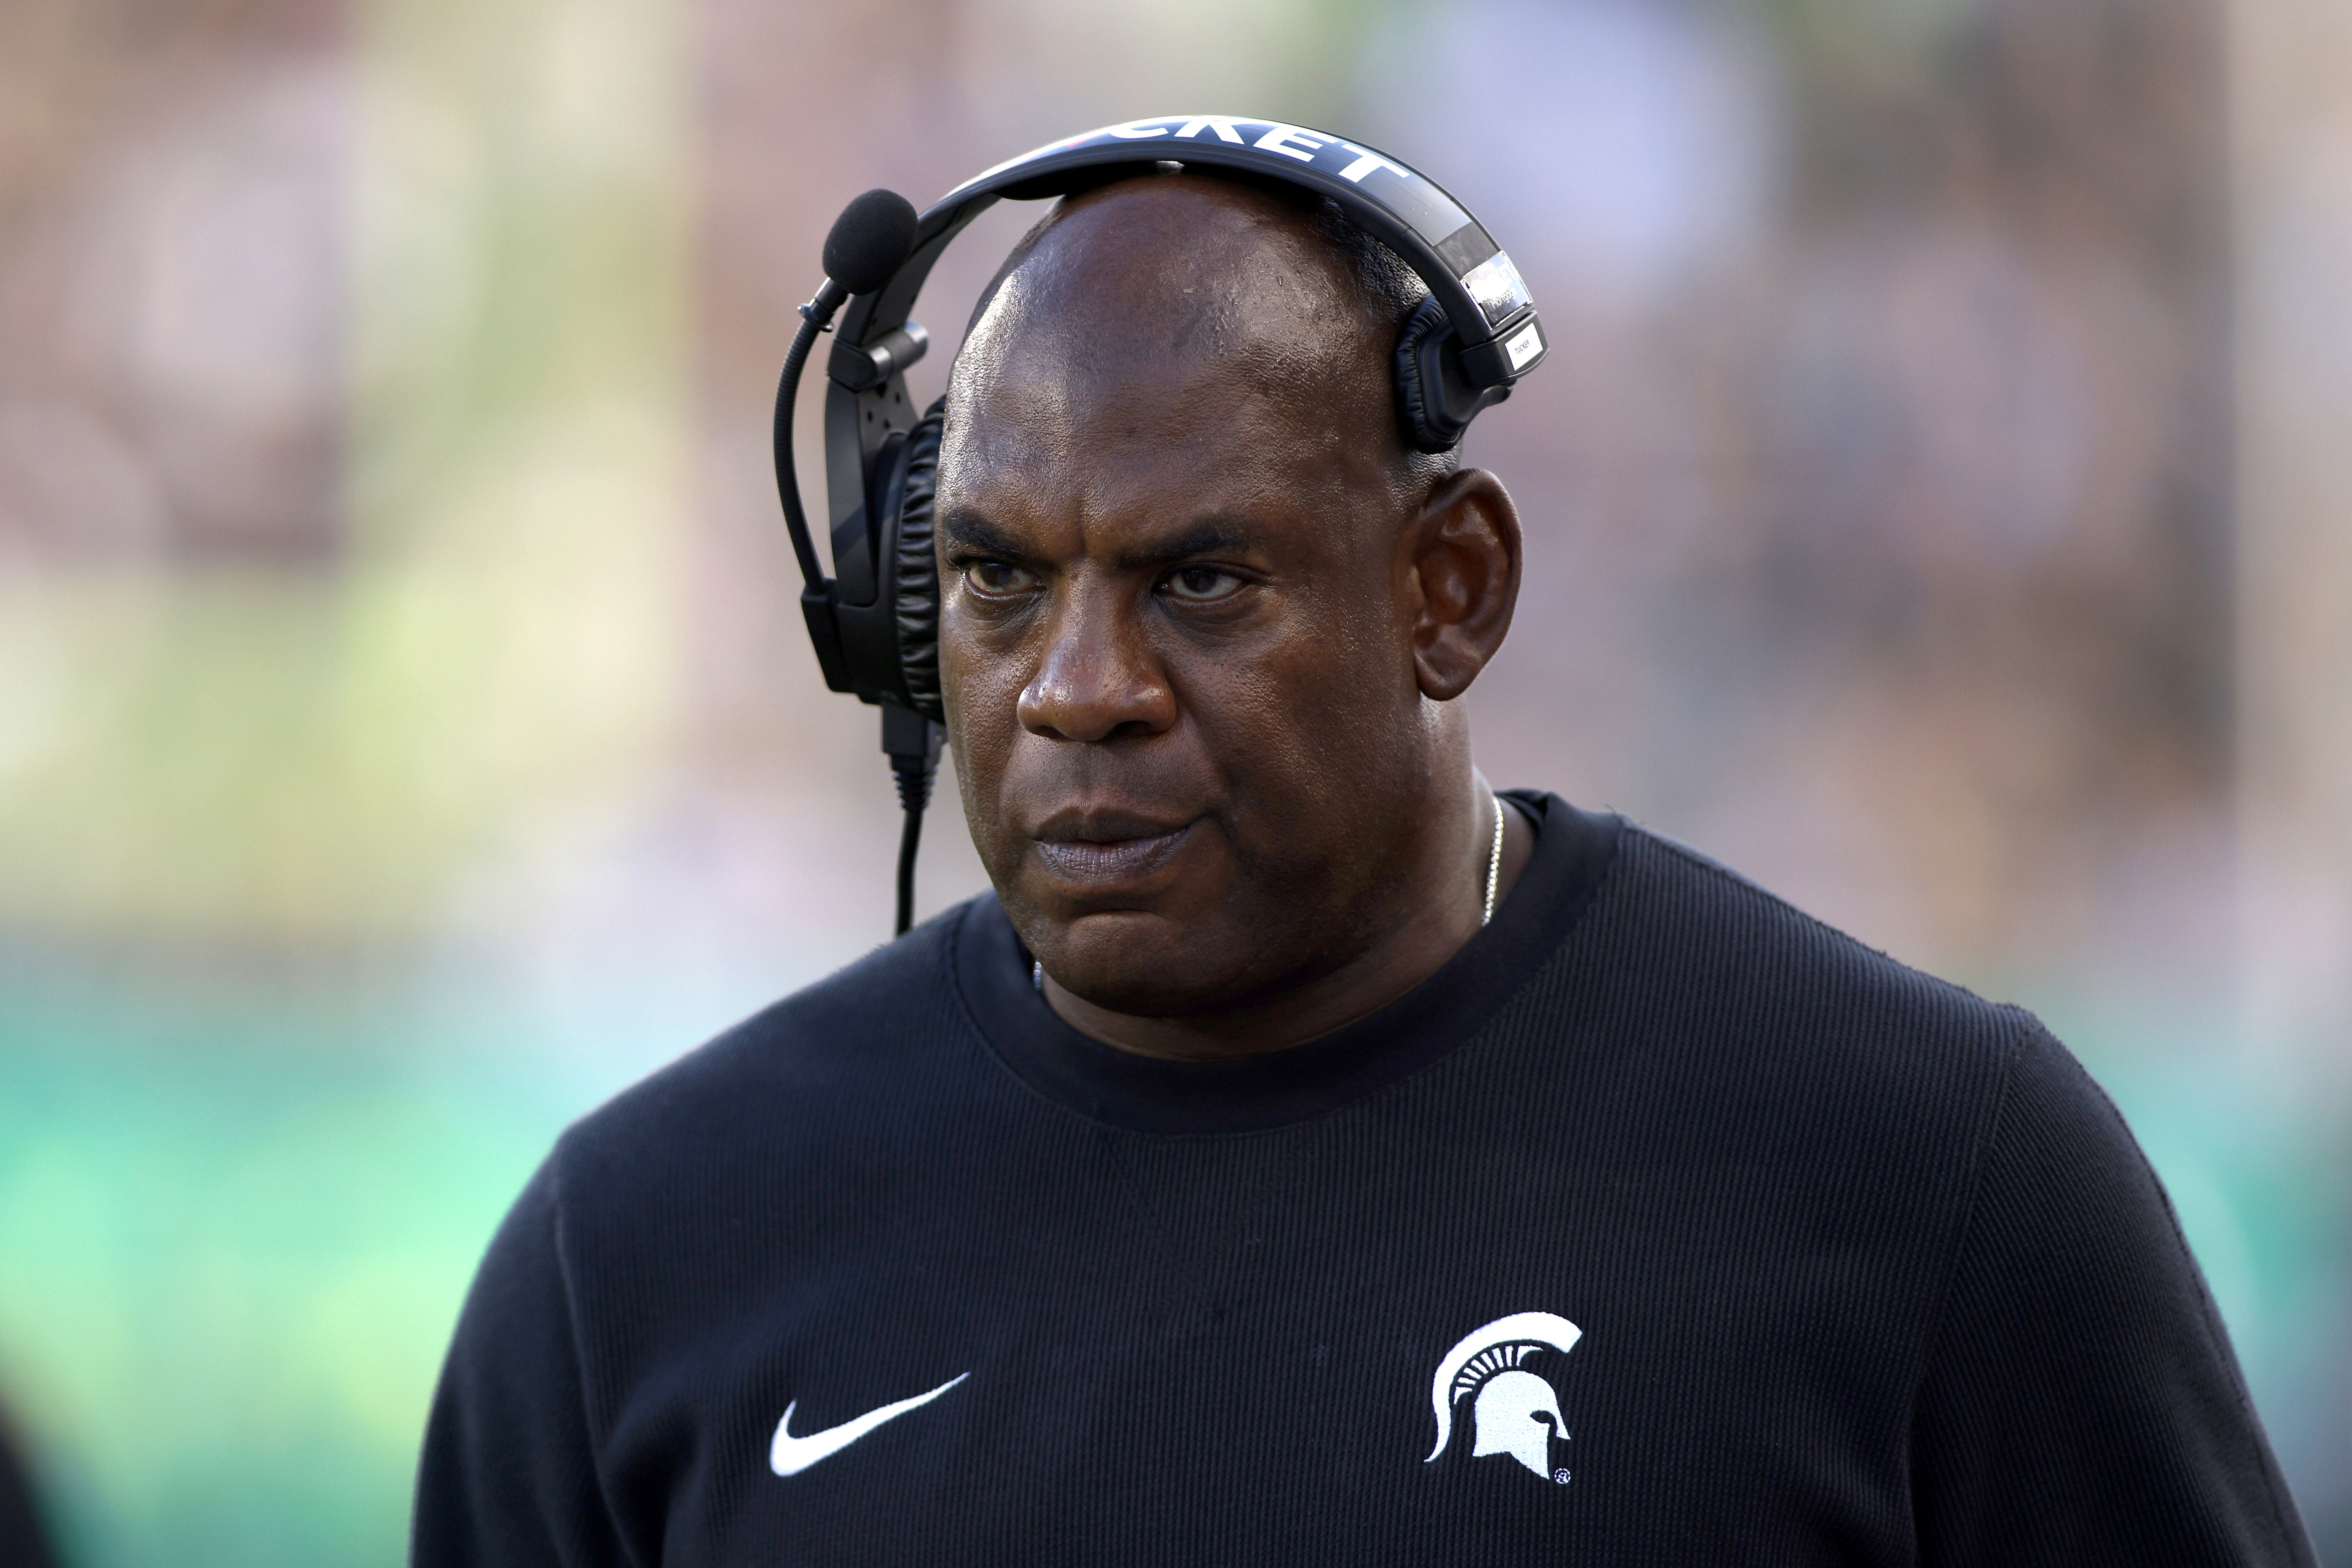 Mel Tuckers attorney Michigan State doesnt have cause to fire suspended coach over phone picture